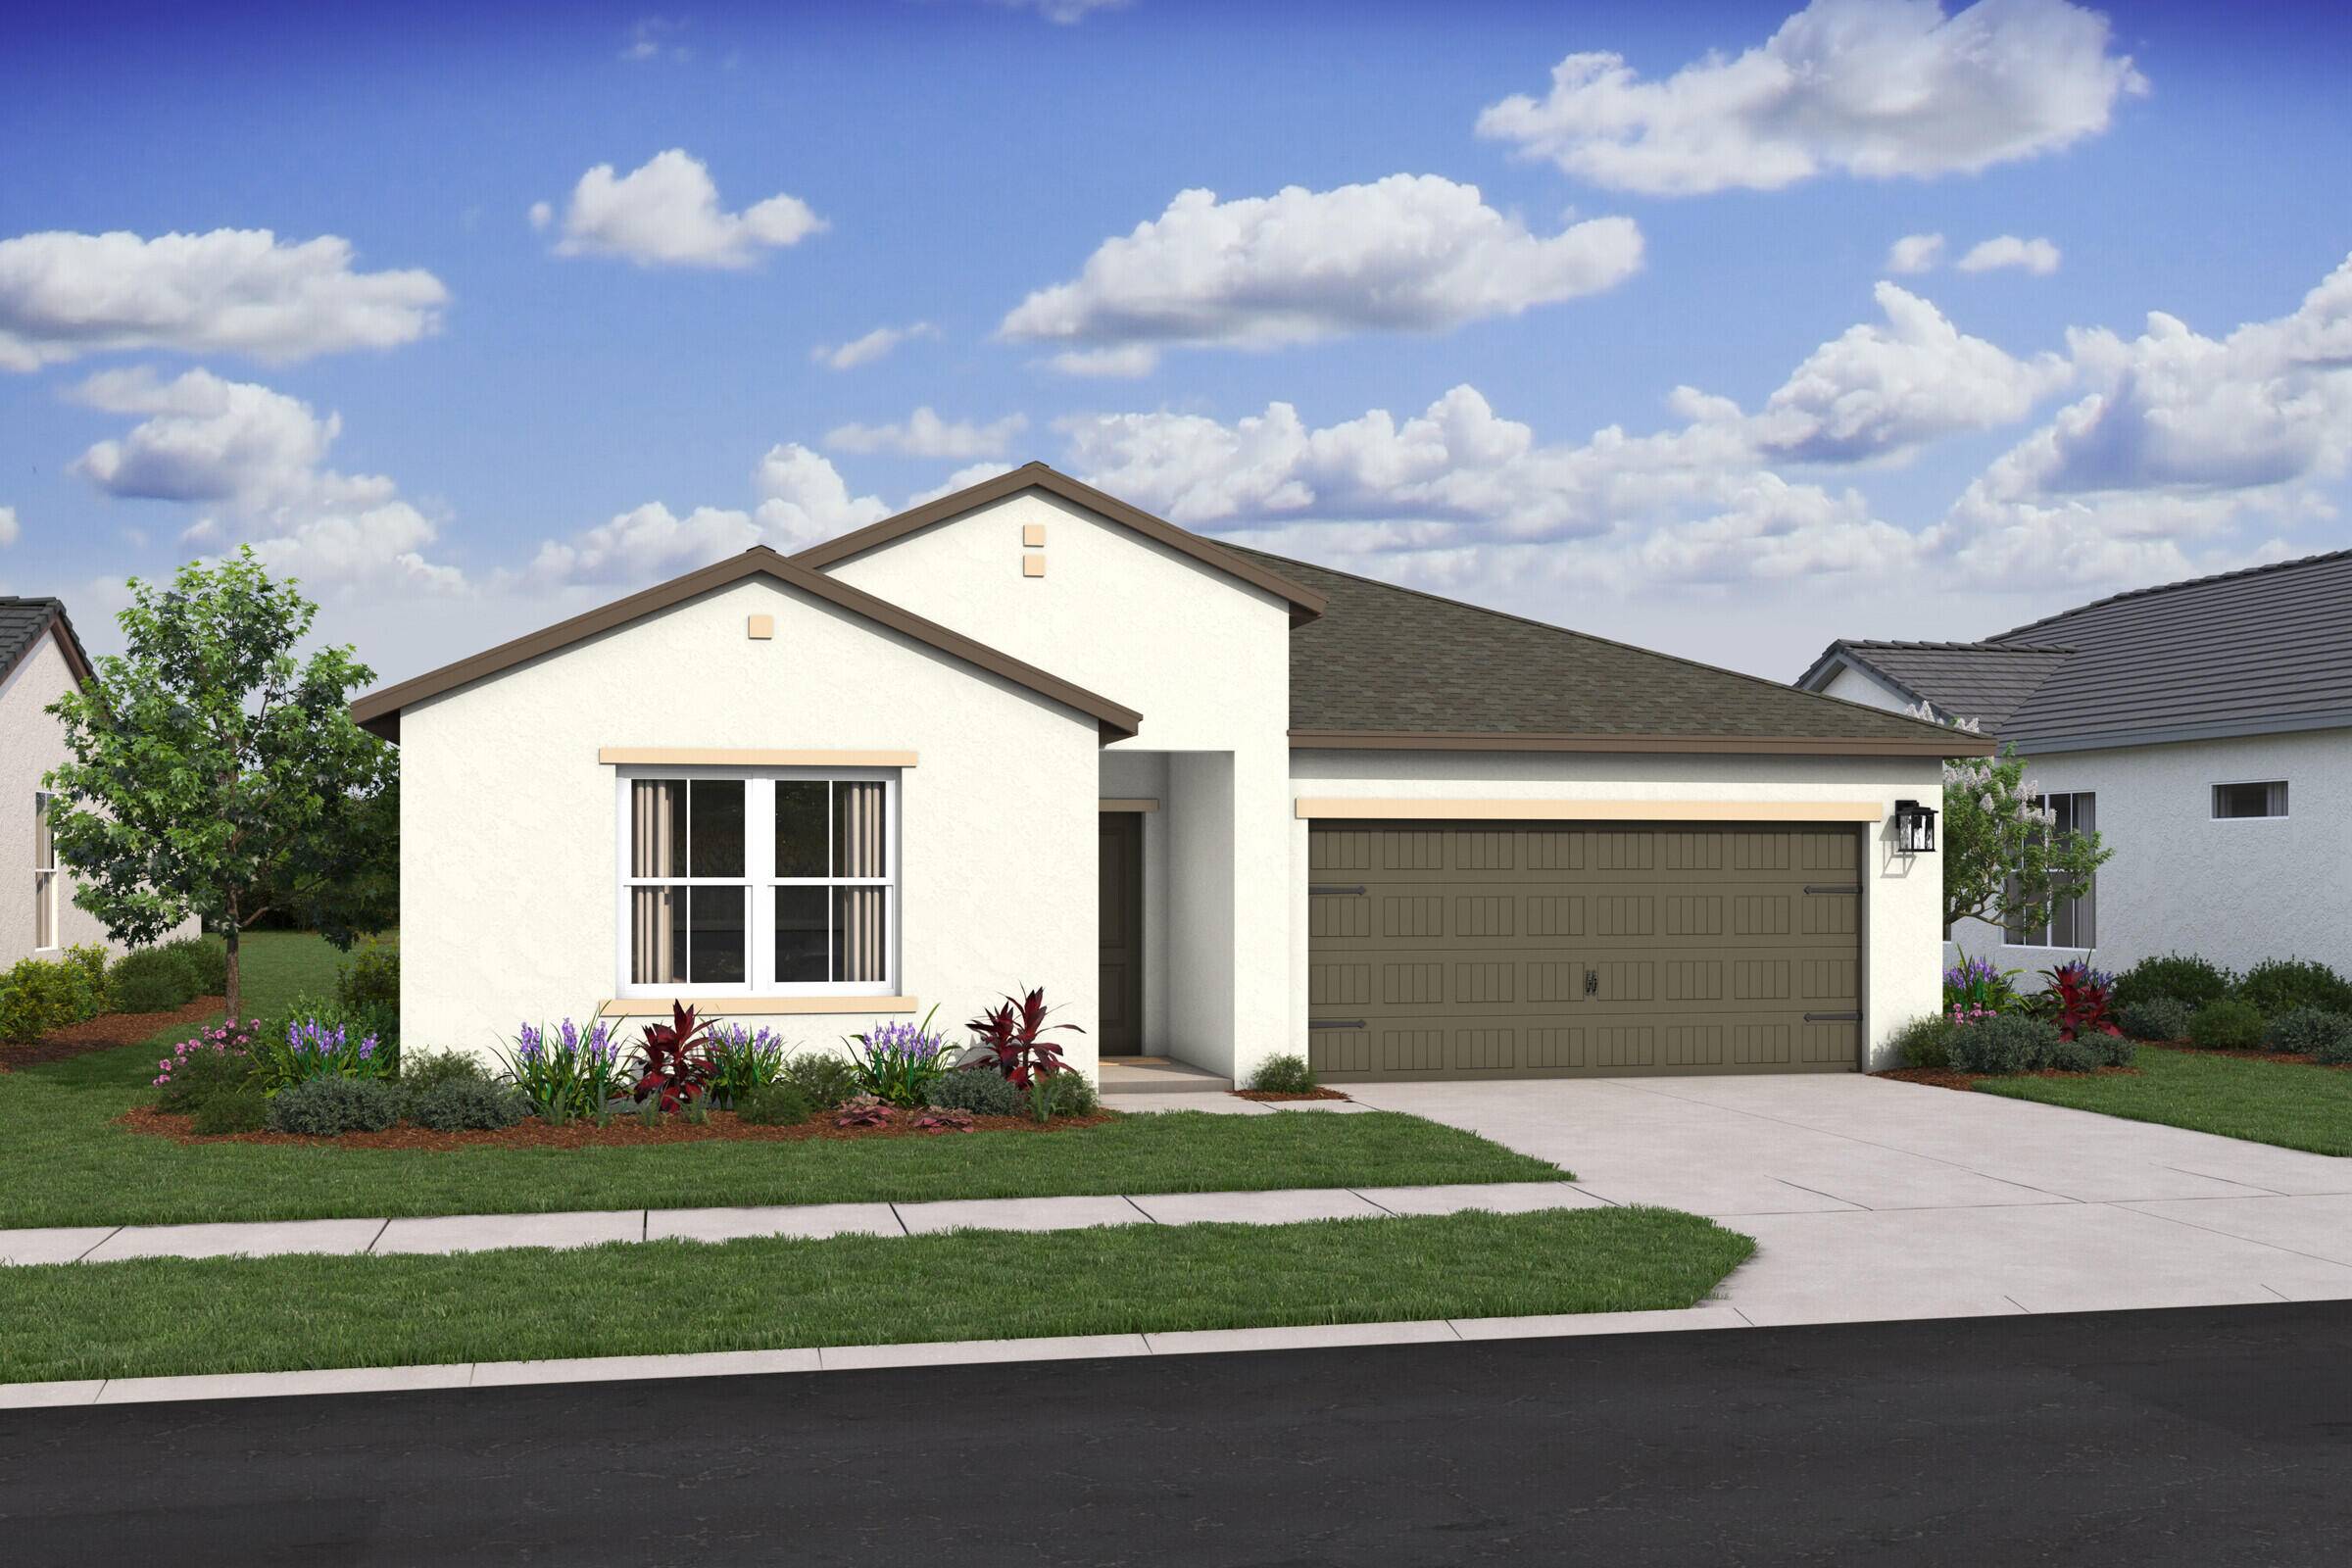 There is no other brand new home like this being offering in Palm Bay.